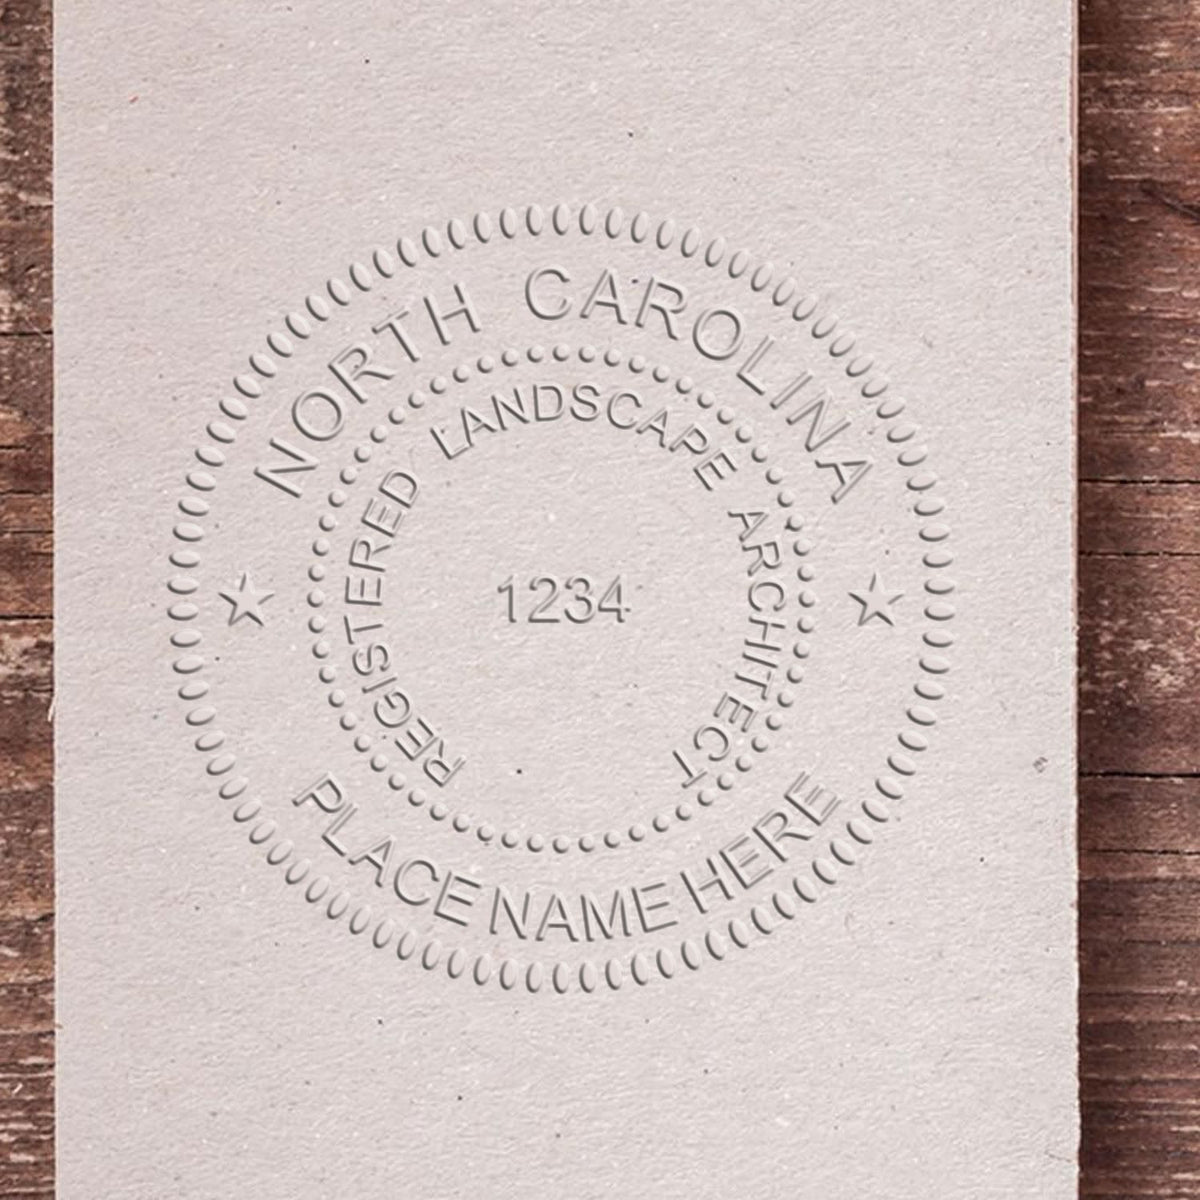 The Soft Pocket North Carolina Landscape Architect Embosser stamp impression comes to life with a crisp, detailed photo on paper - showcasing true professional quality.